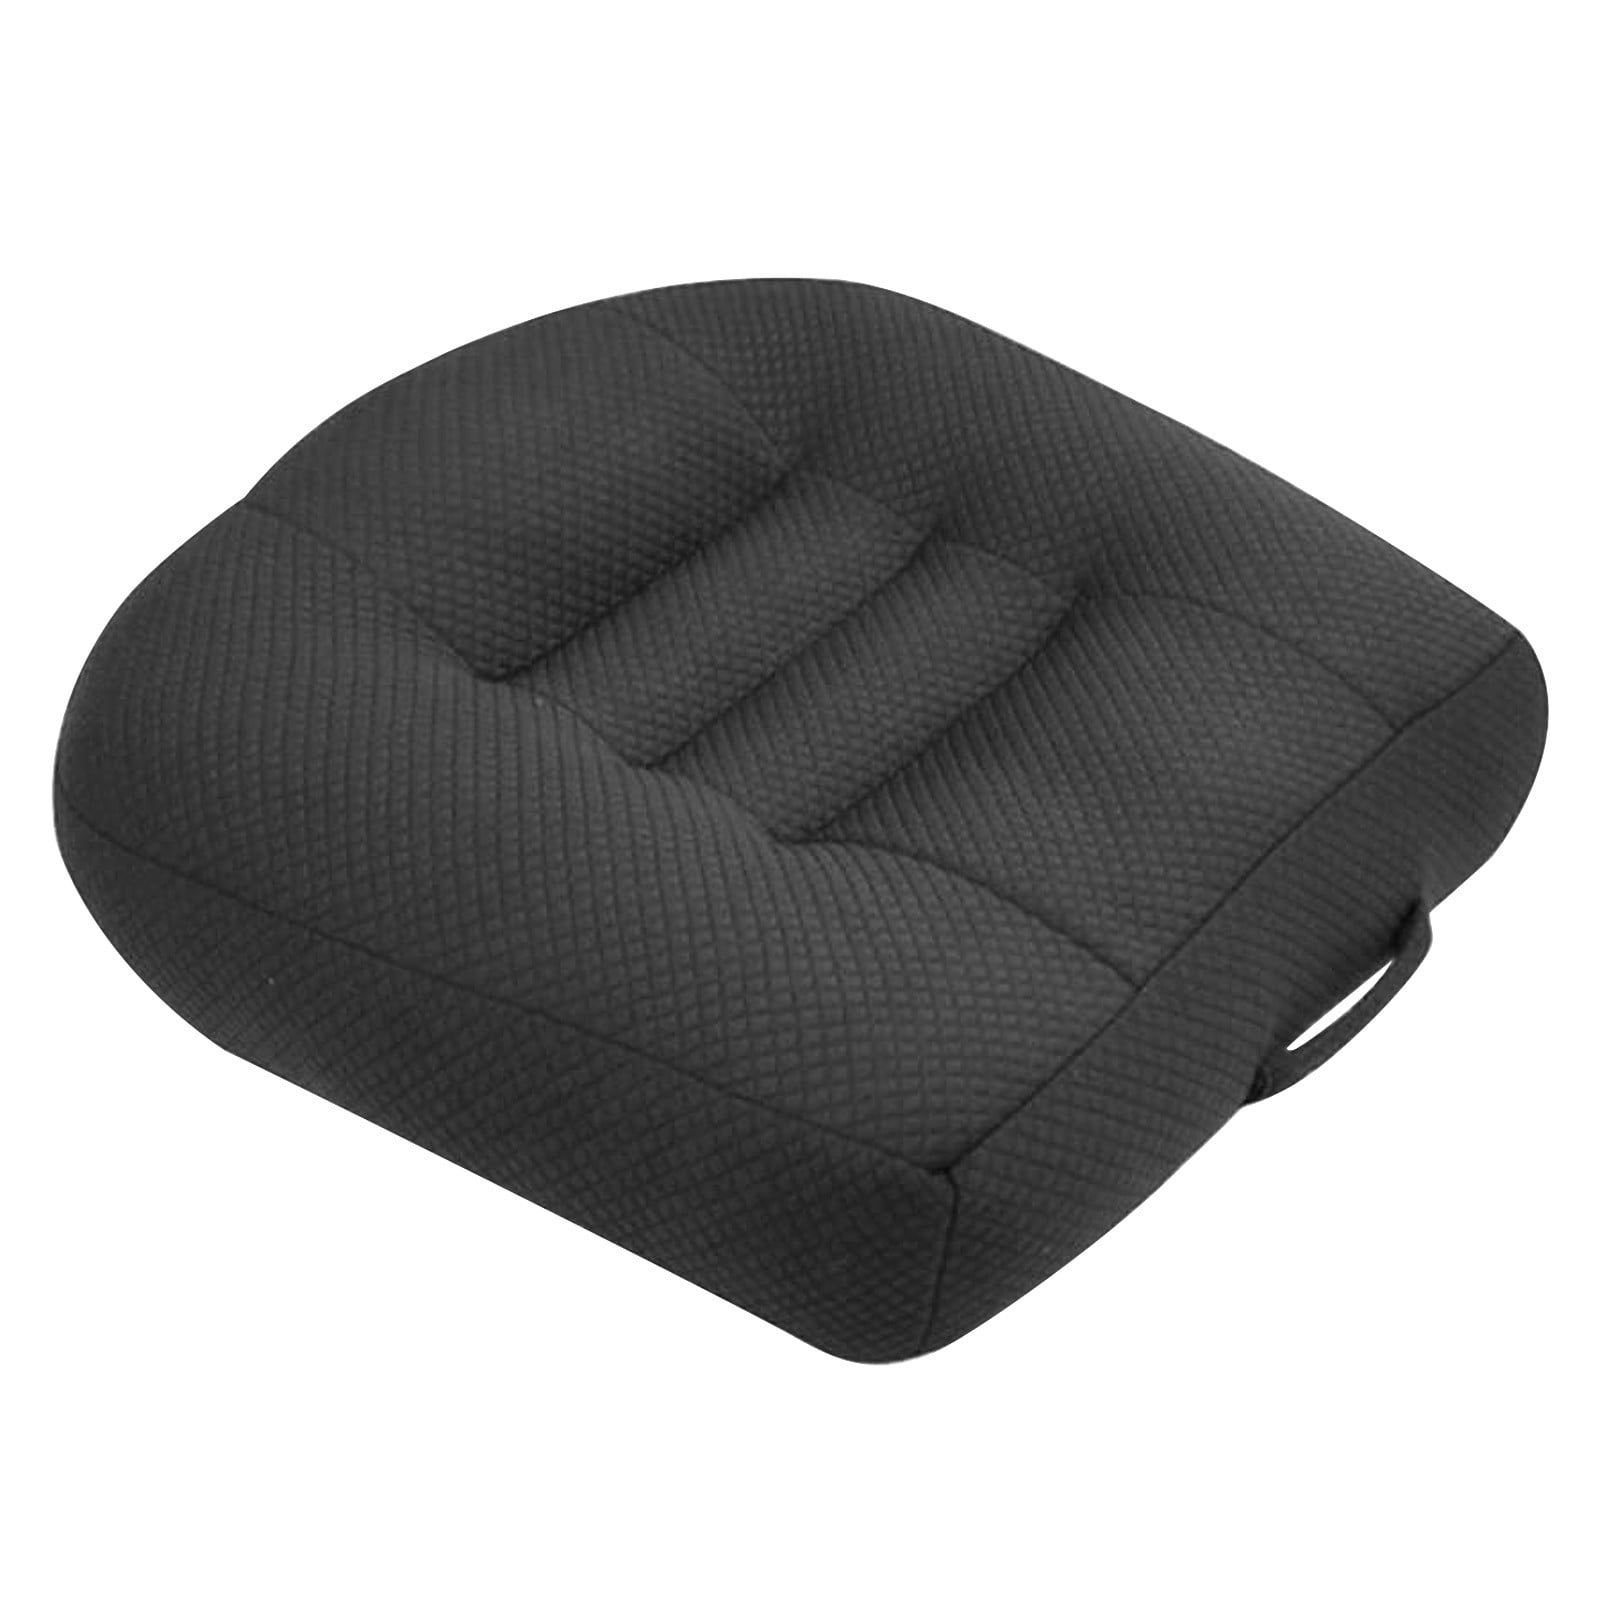 38x38x12 cm QIQIQ Car Booster Seat Cushion Driver Posture Heightening Height 12 cm Breathable Mesh Lift Seat for Office Home 